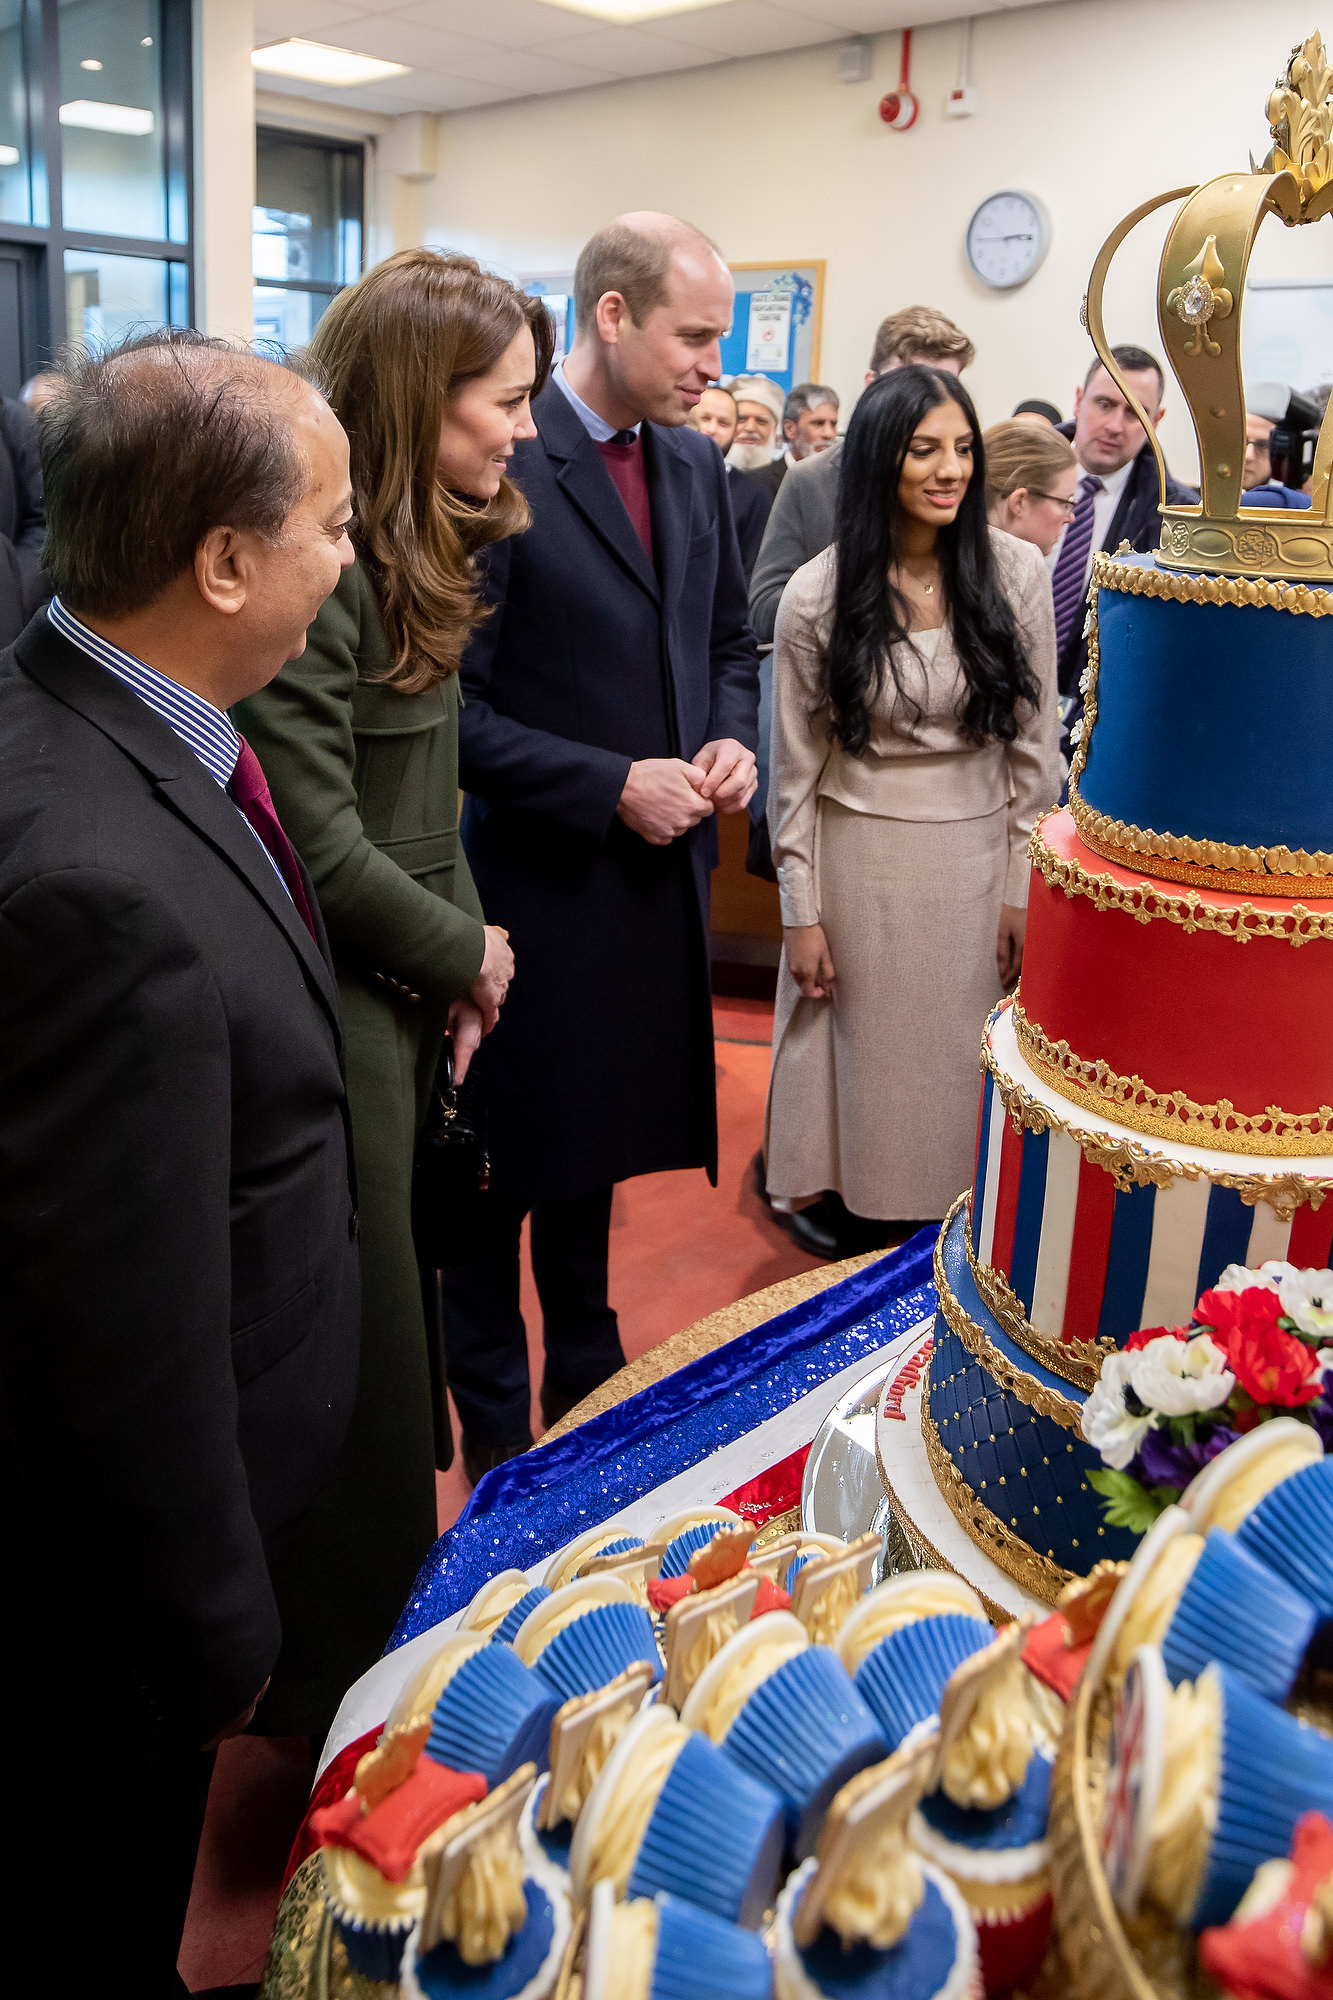 BRADFORD, ENGLAND - JANUARY 15: Prince William, Duke of Cambridge and Catherine, Duchess of Cambridge inspect cakes as they visit the Khidmat Centre on January 15, 2020 in Bradford, United Kingdom. (Photo by Charlotte Graham - WPA Pool/Getty Images)